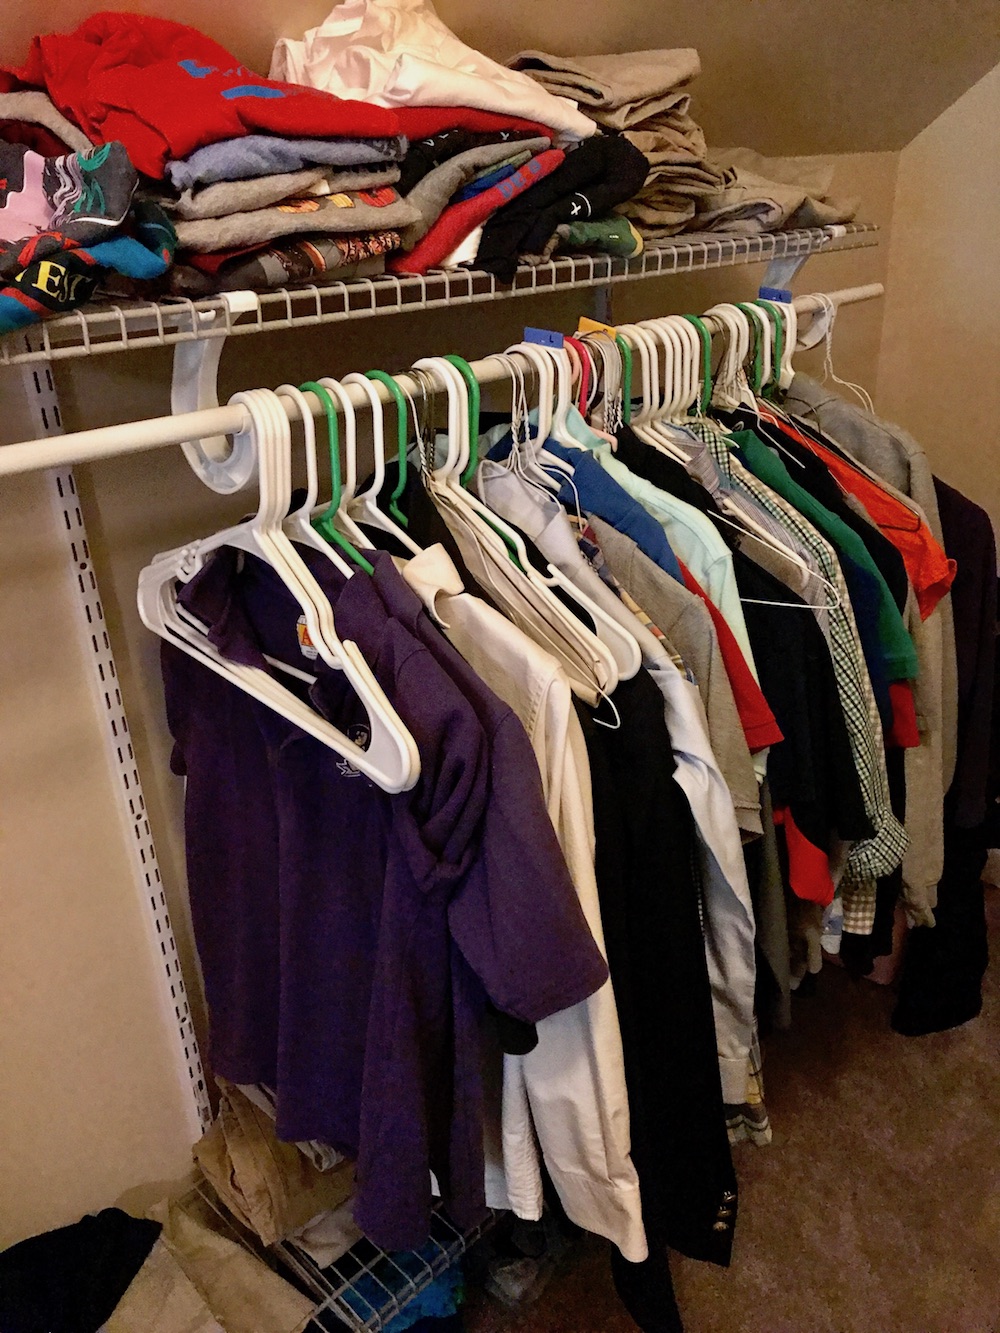 How to make a capsule wardrobe for kids: Before the purge.